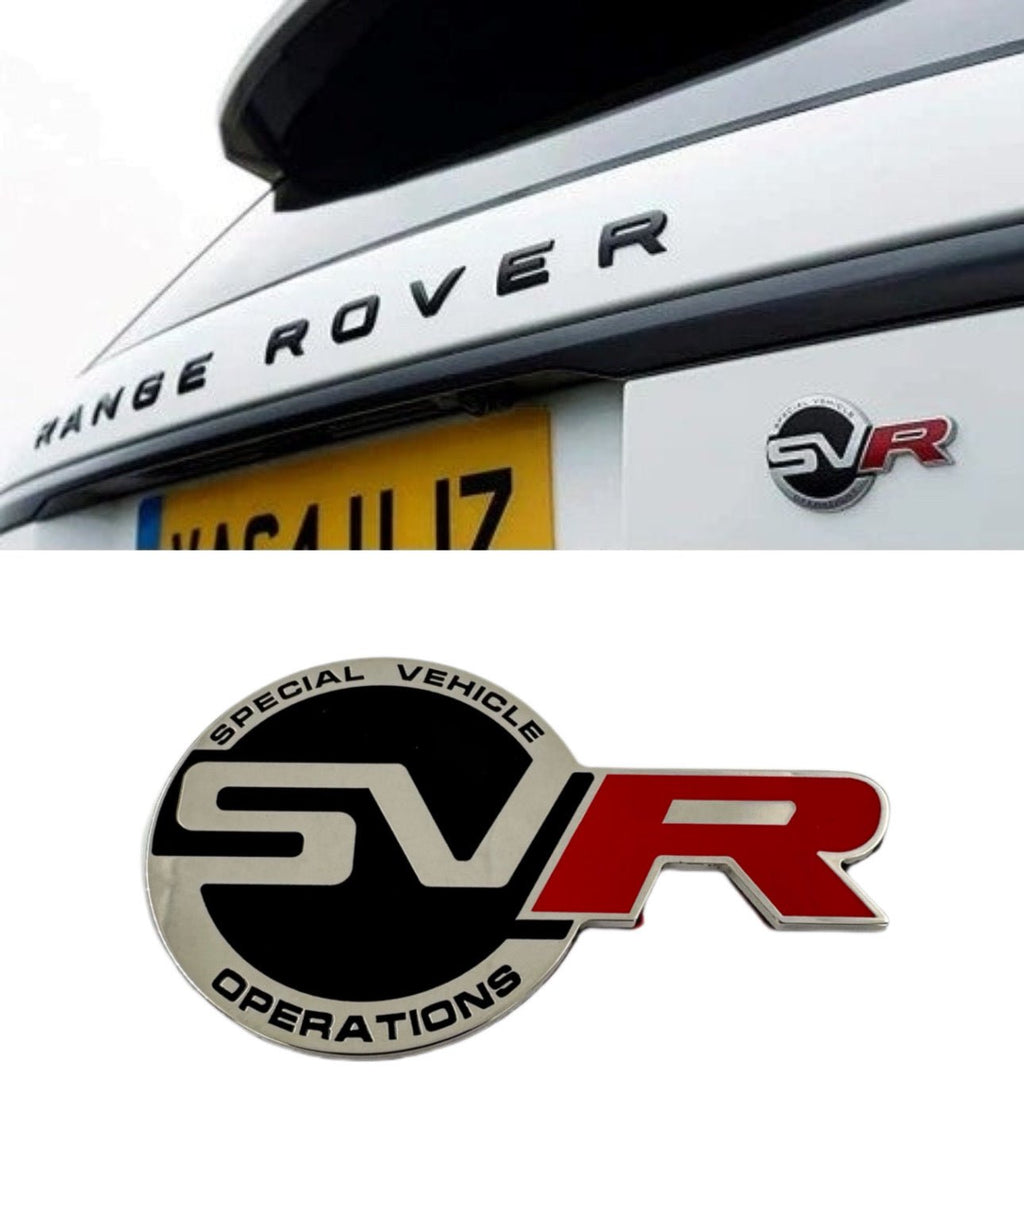 Range Rover SVR Special Operations style badge